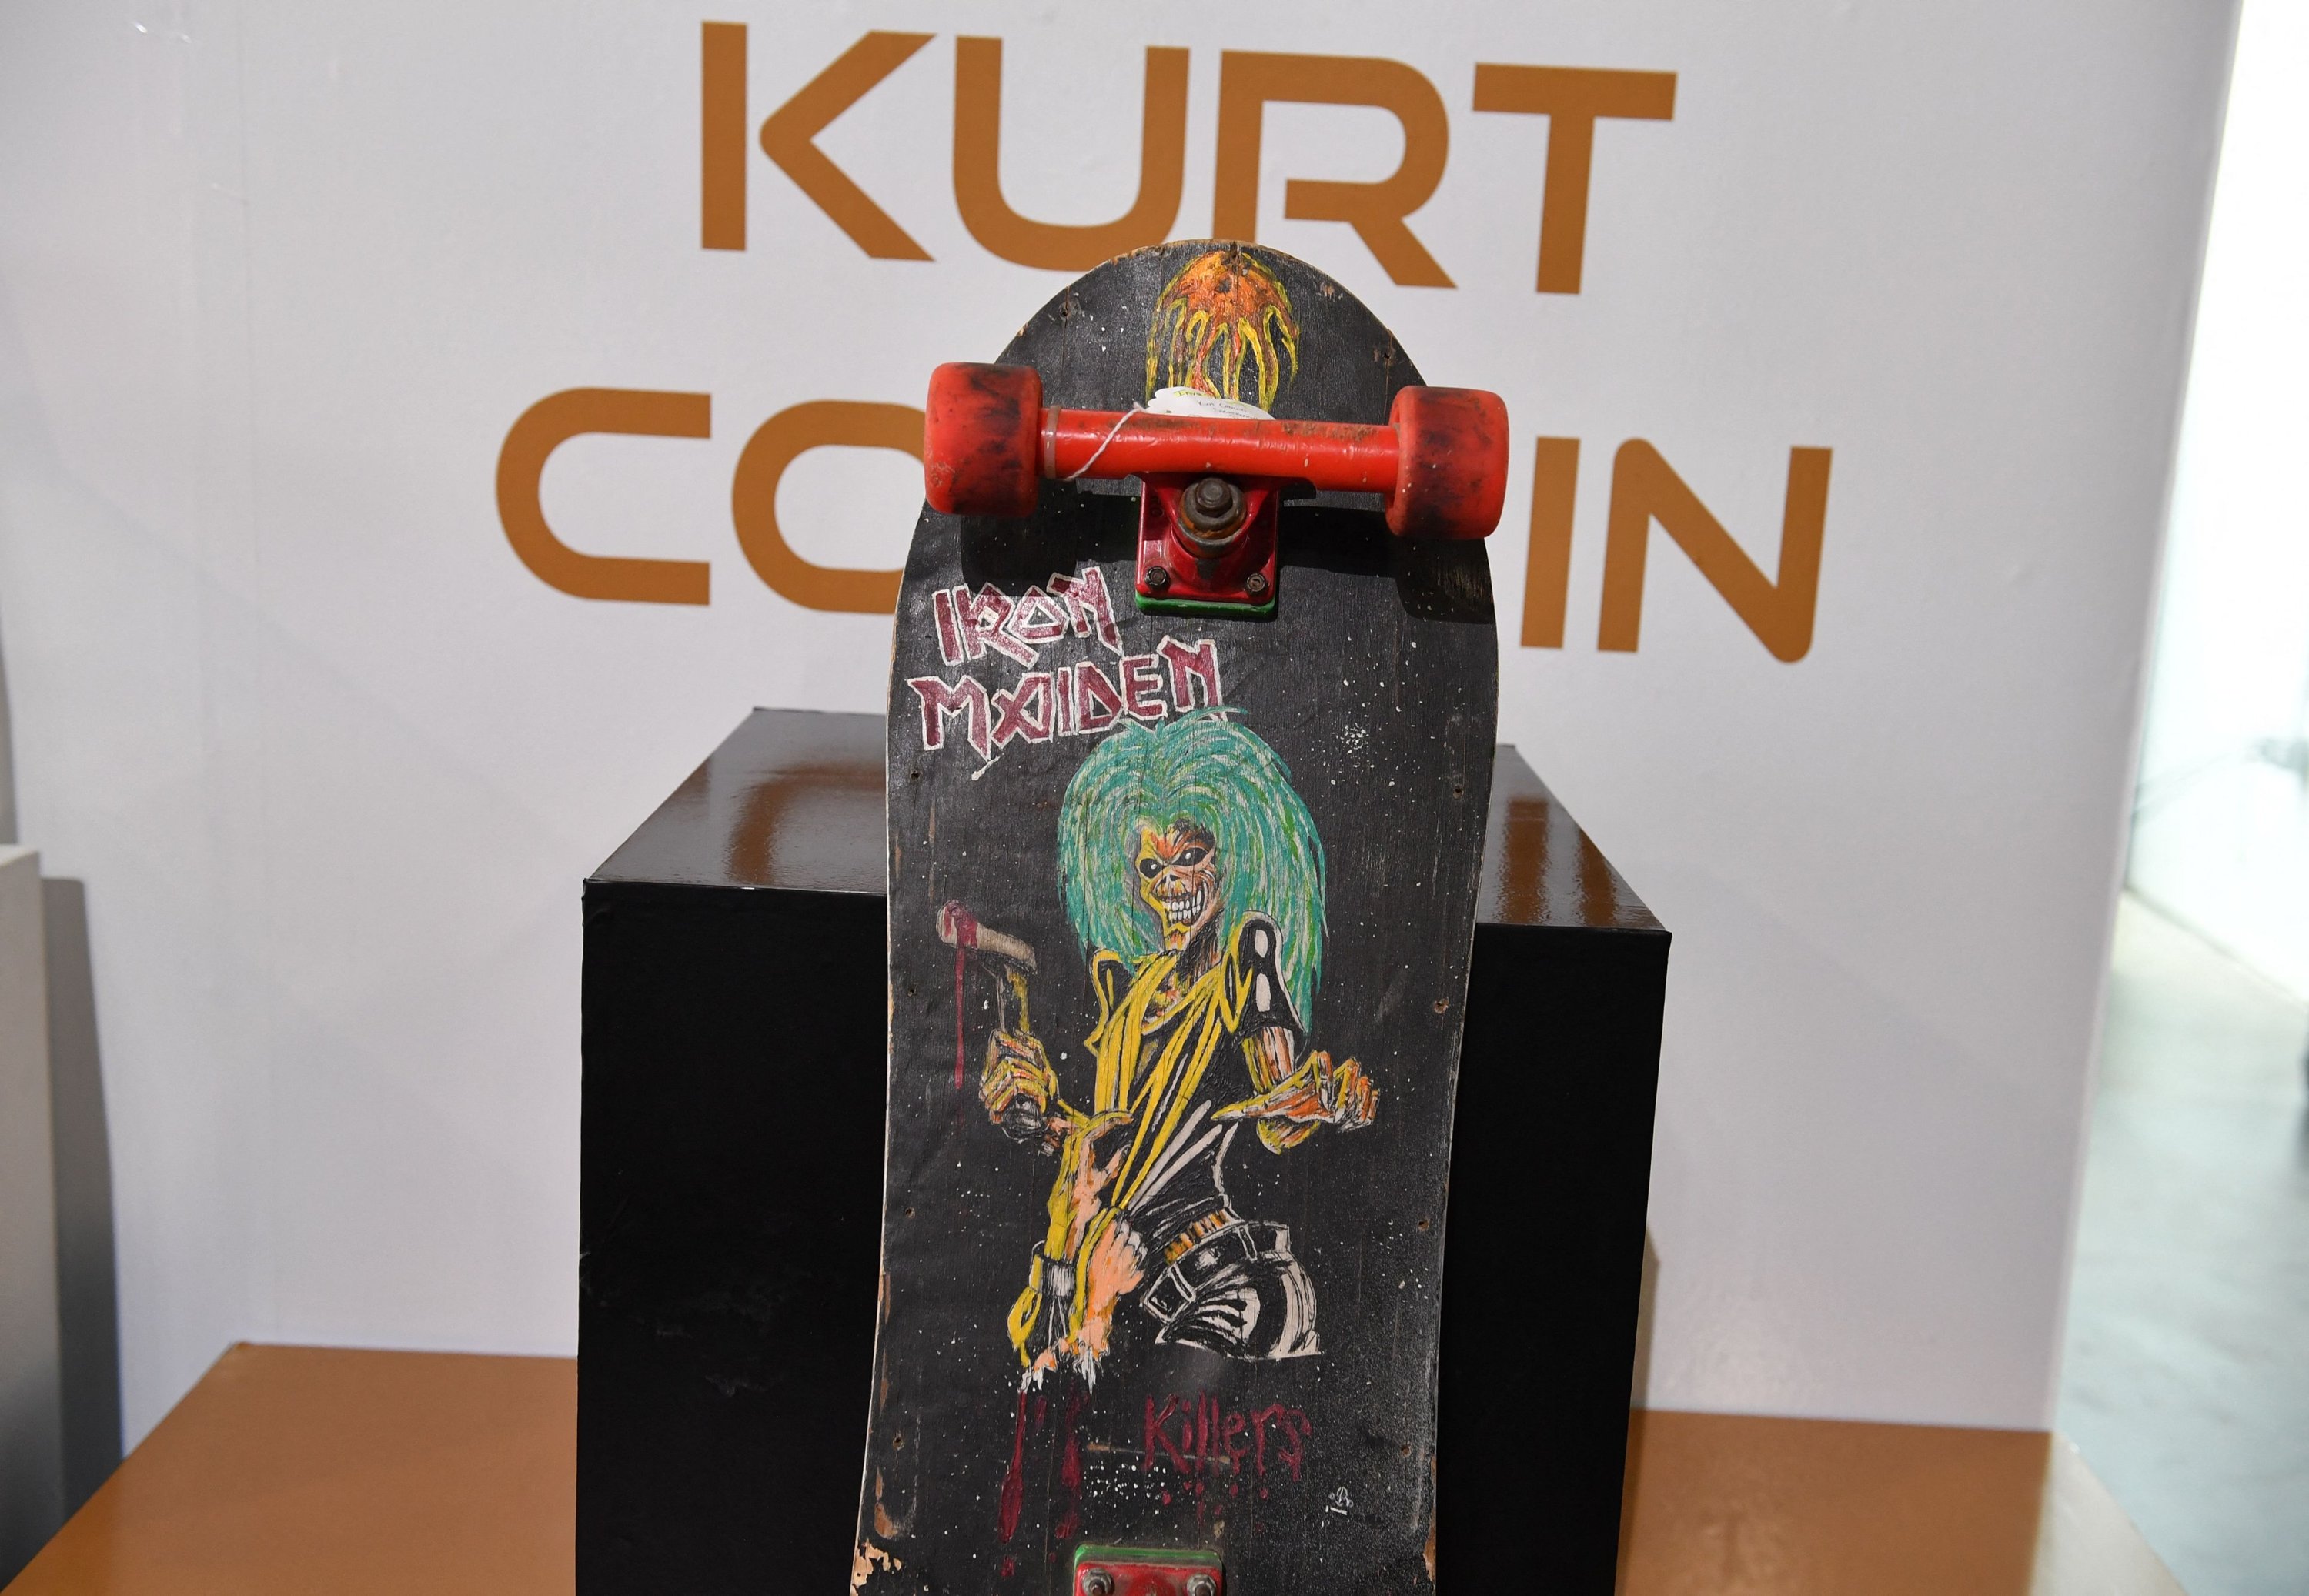 A skateboard owned and hand decorated by Kurt Cobain is displayed at the media preview of the upcoming 